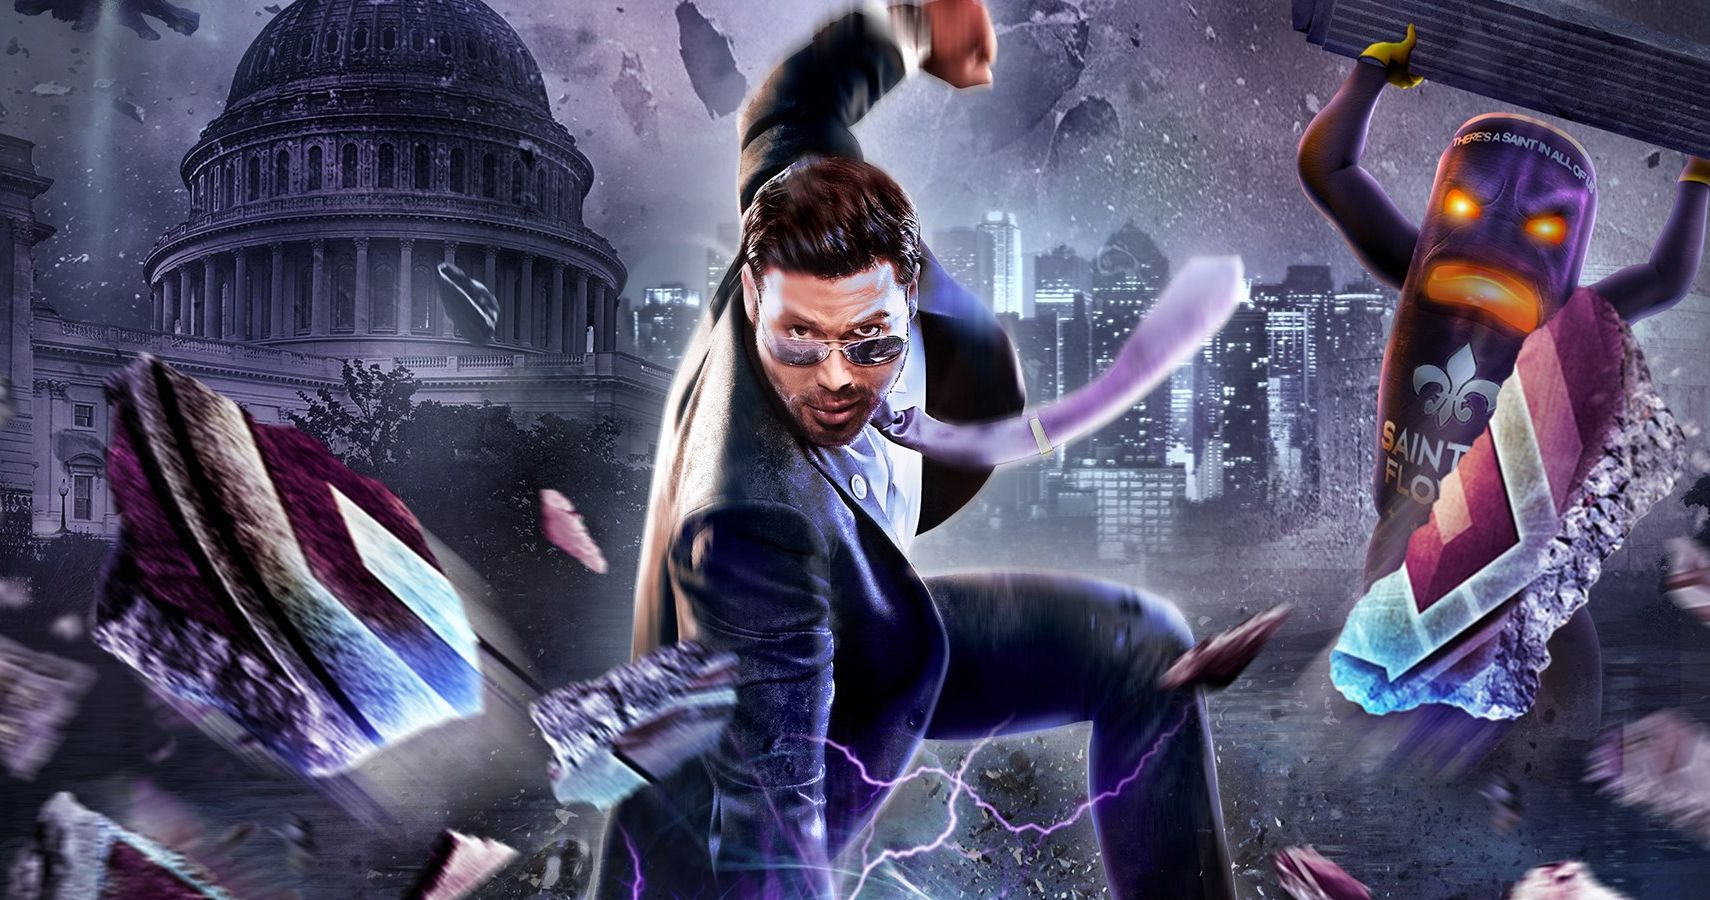 Saints Row IV Is Still A Great Game, But Its Switch Port Could Use Some Work